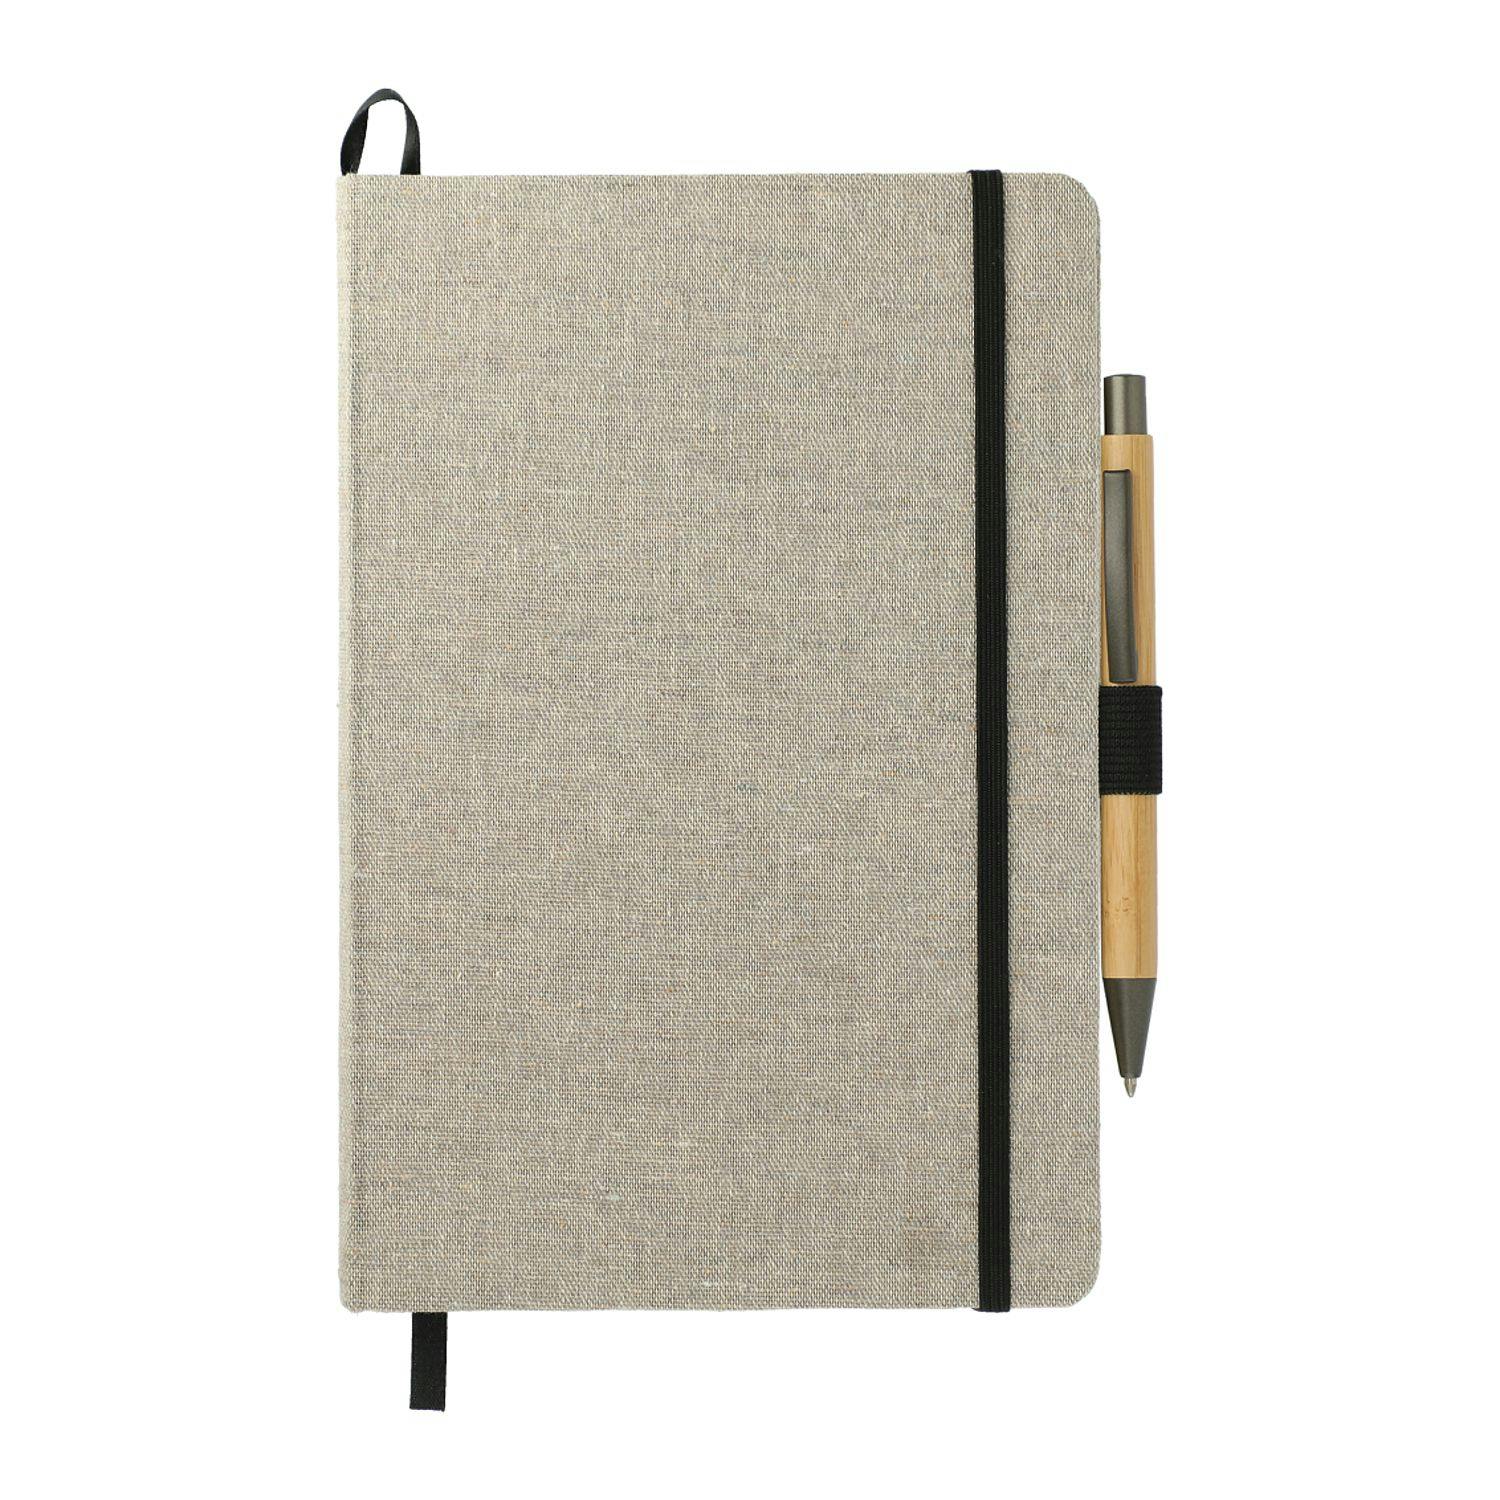 5.5" x 8.5" Recycled Cotton Bound JournalBook® Set - additional Image 1